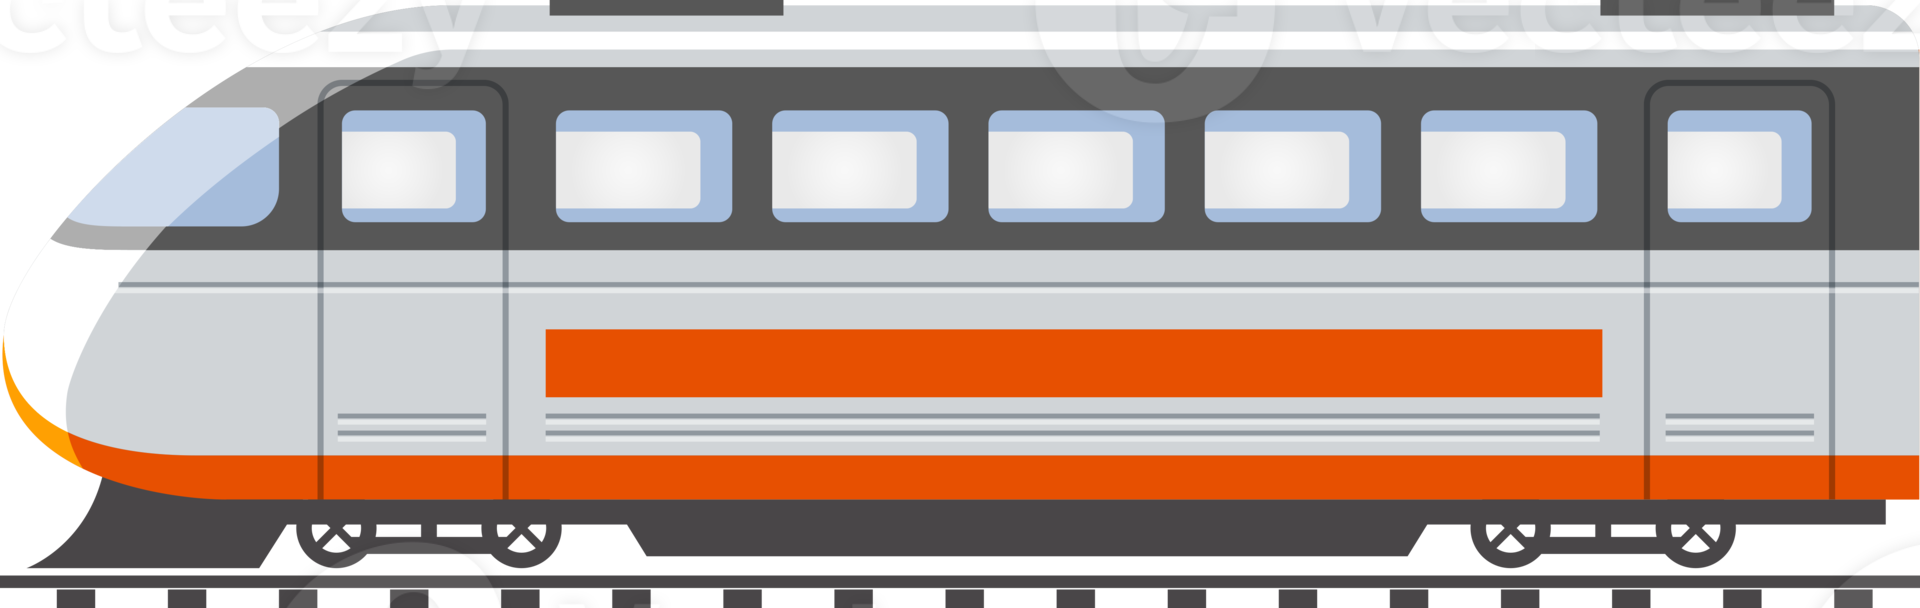 electric train flat icons png